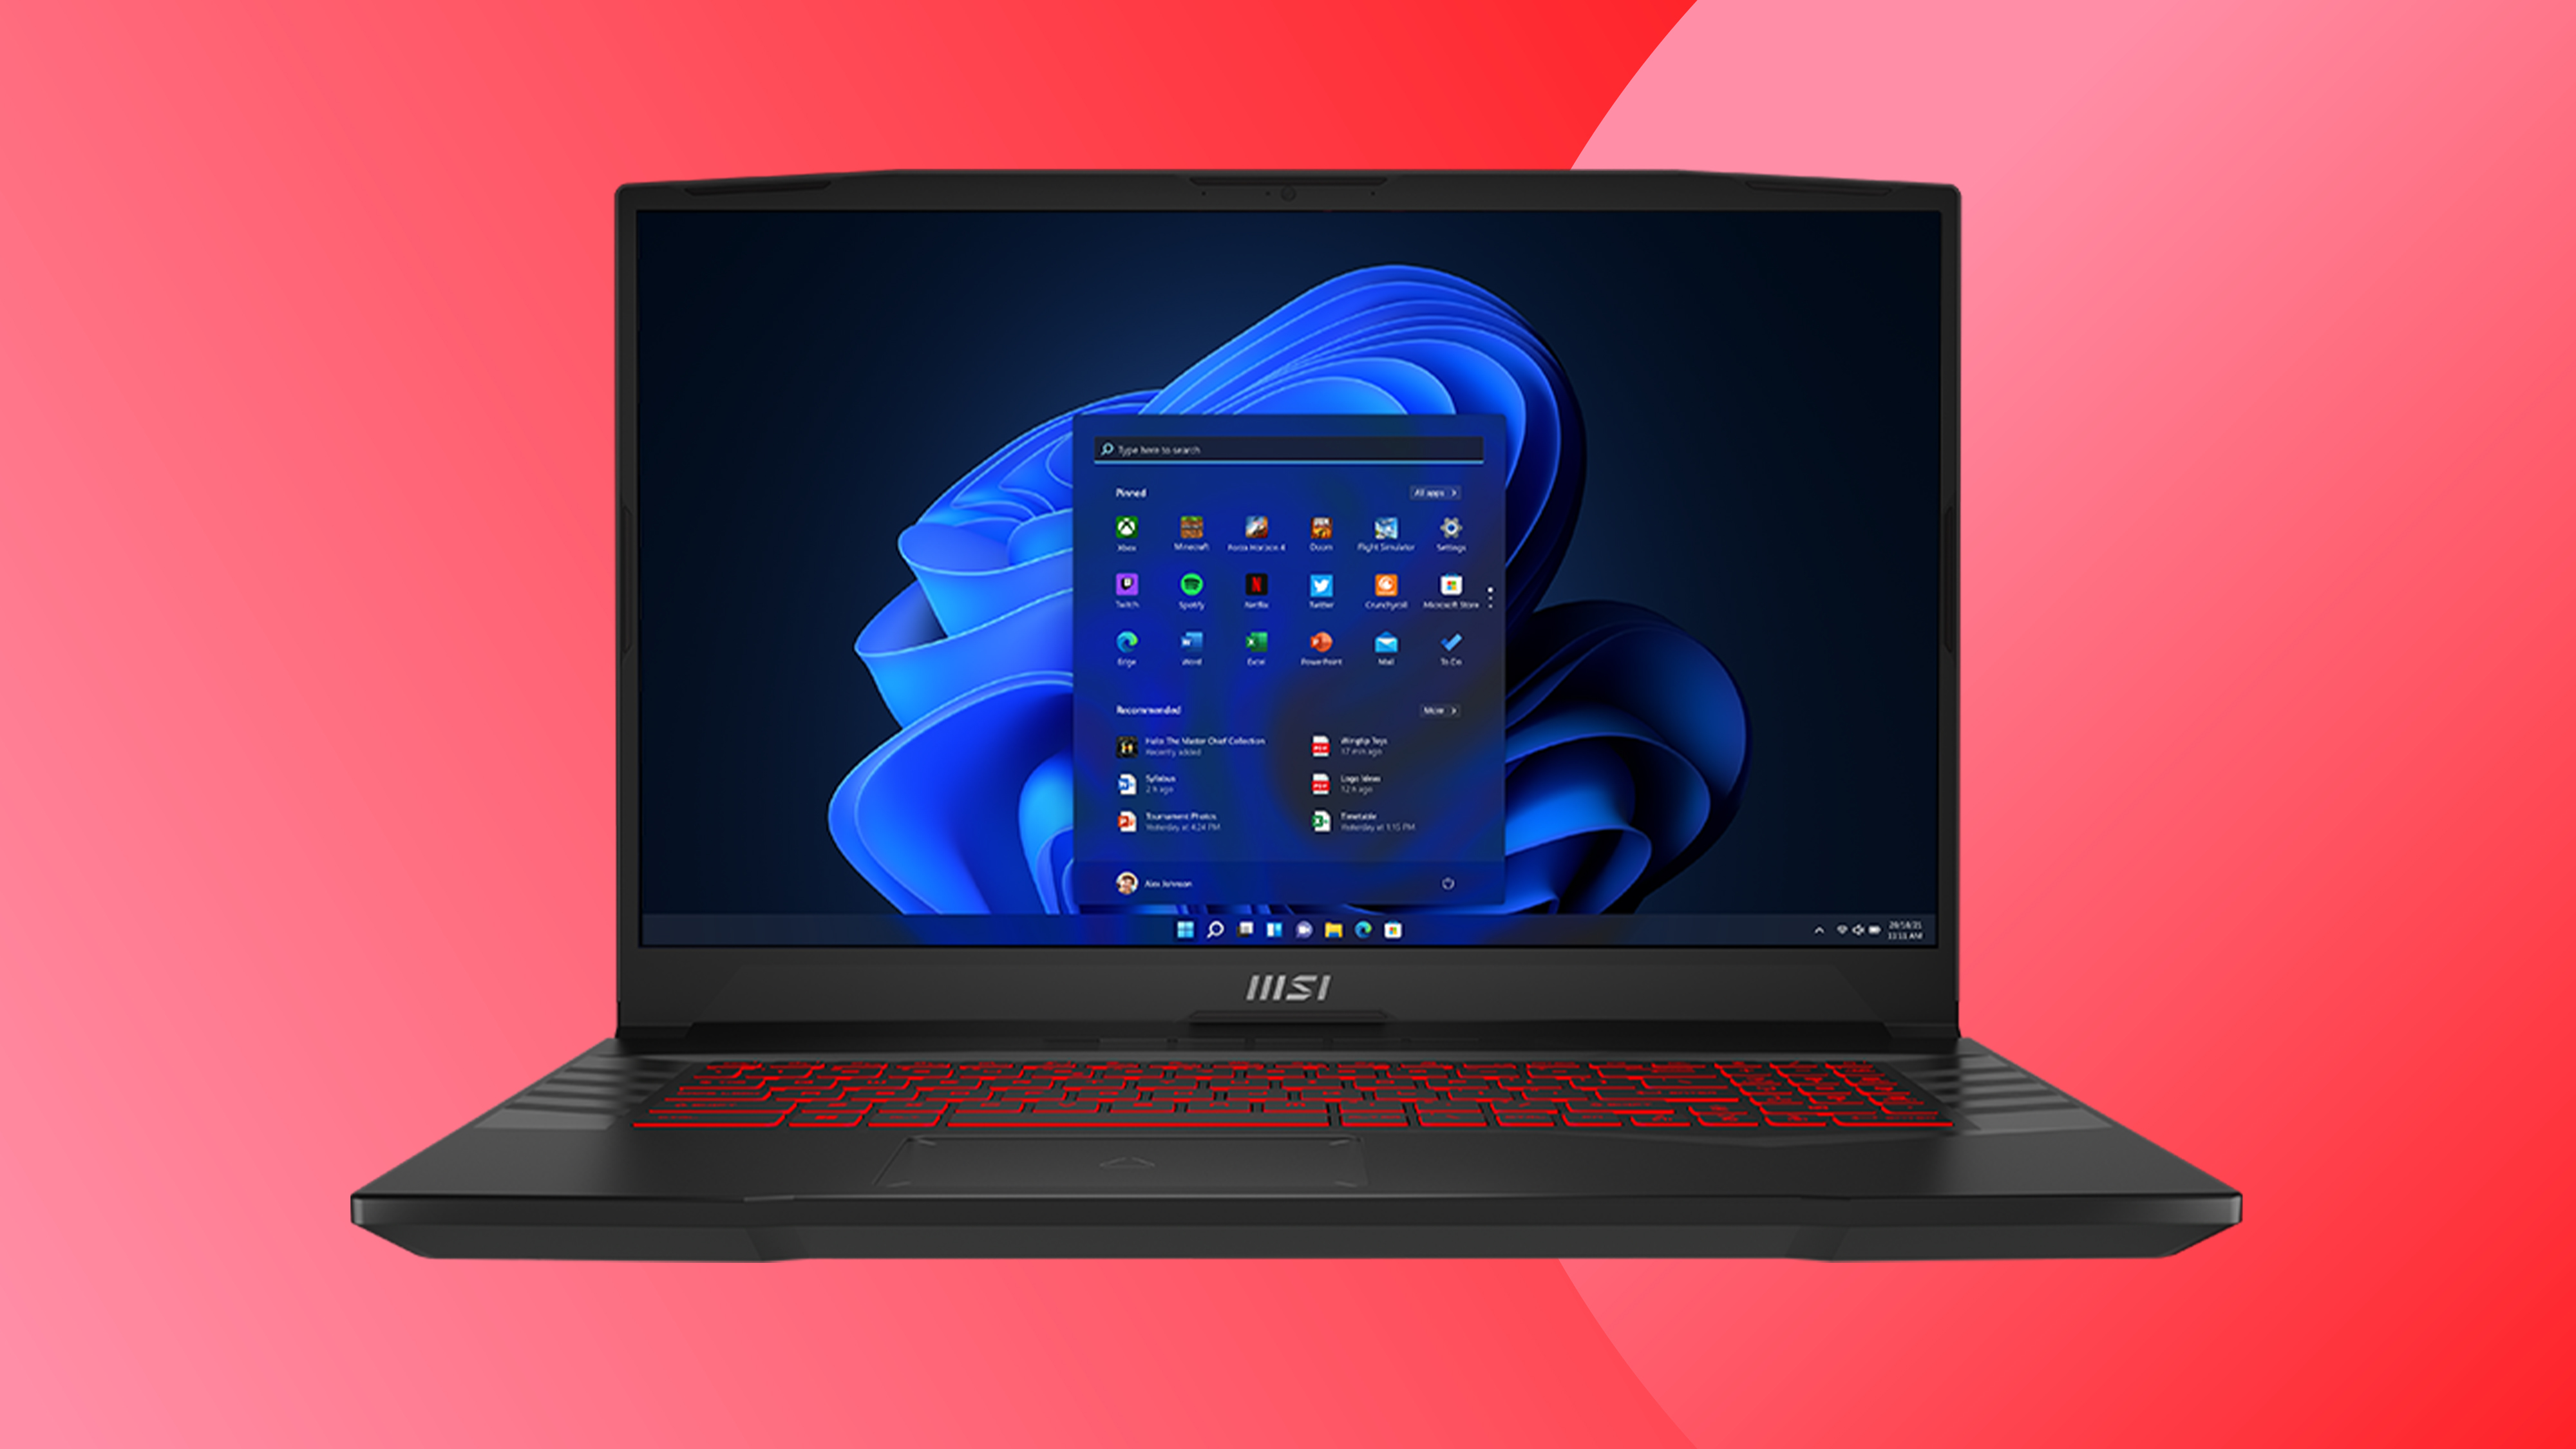 An MSI Cyber Monday deals image with an MSI Pulse GL76 gaming laptop on a red background